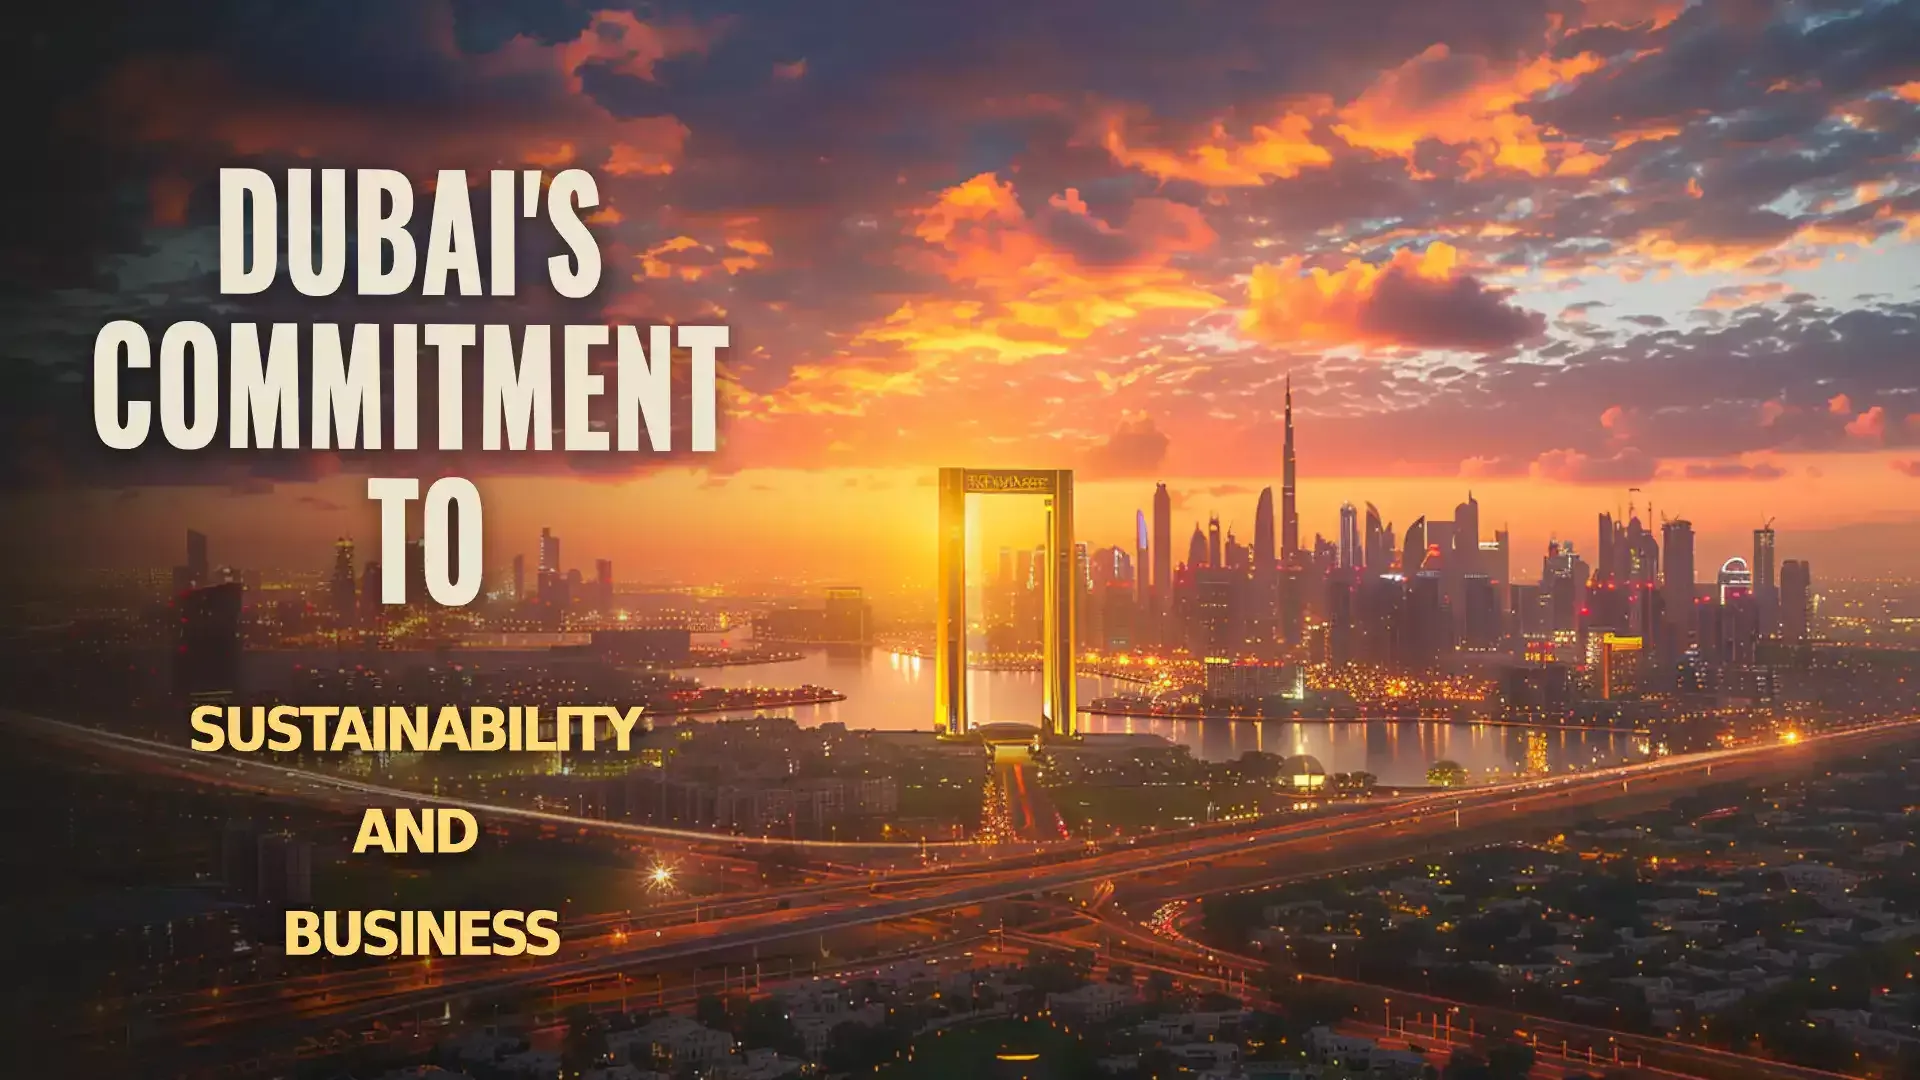 Dubai Business - Catalyst for Growth and Opportunity